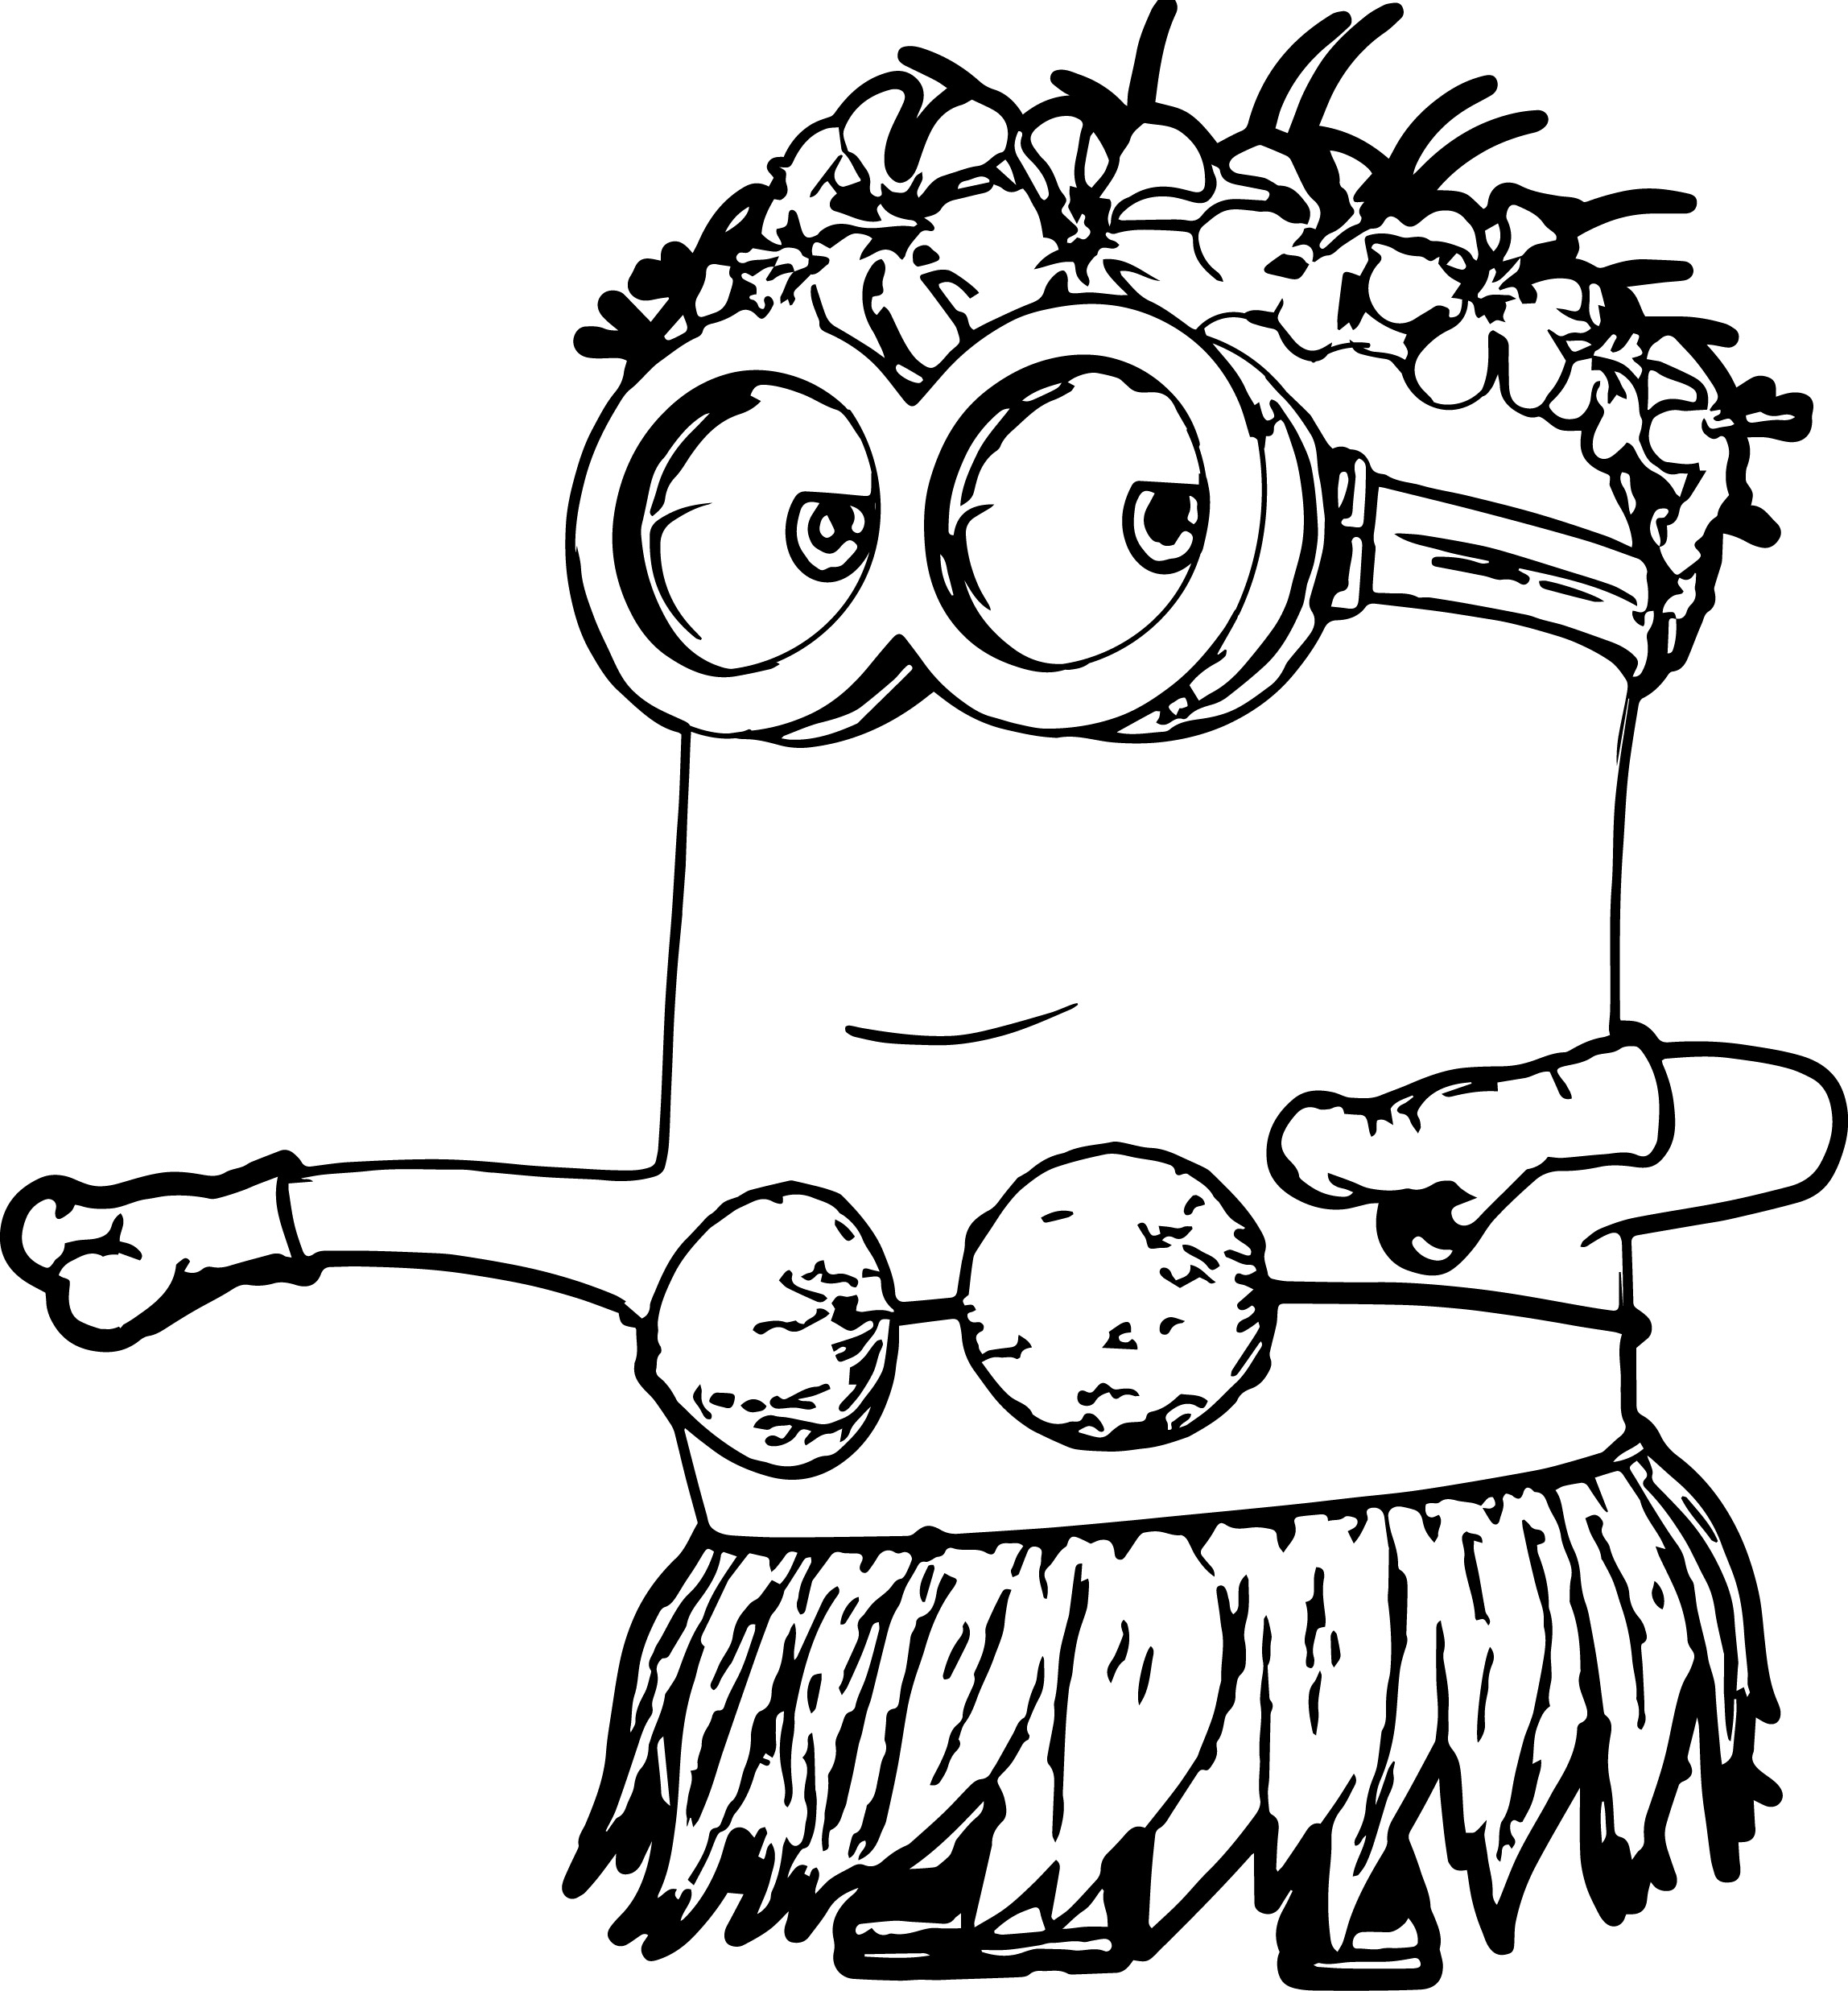 free printable minion coloring pages minion coloring pages best coloring pages for kids minion pages printable coloring free 